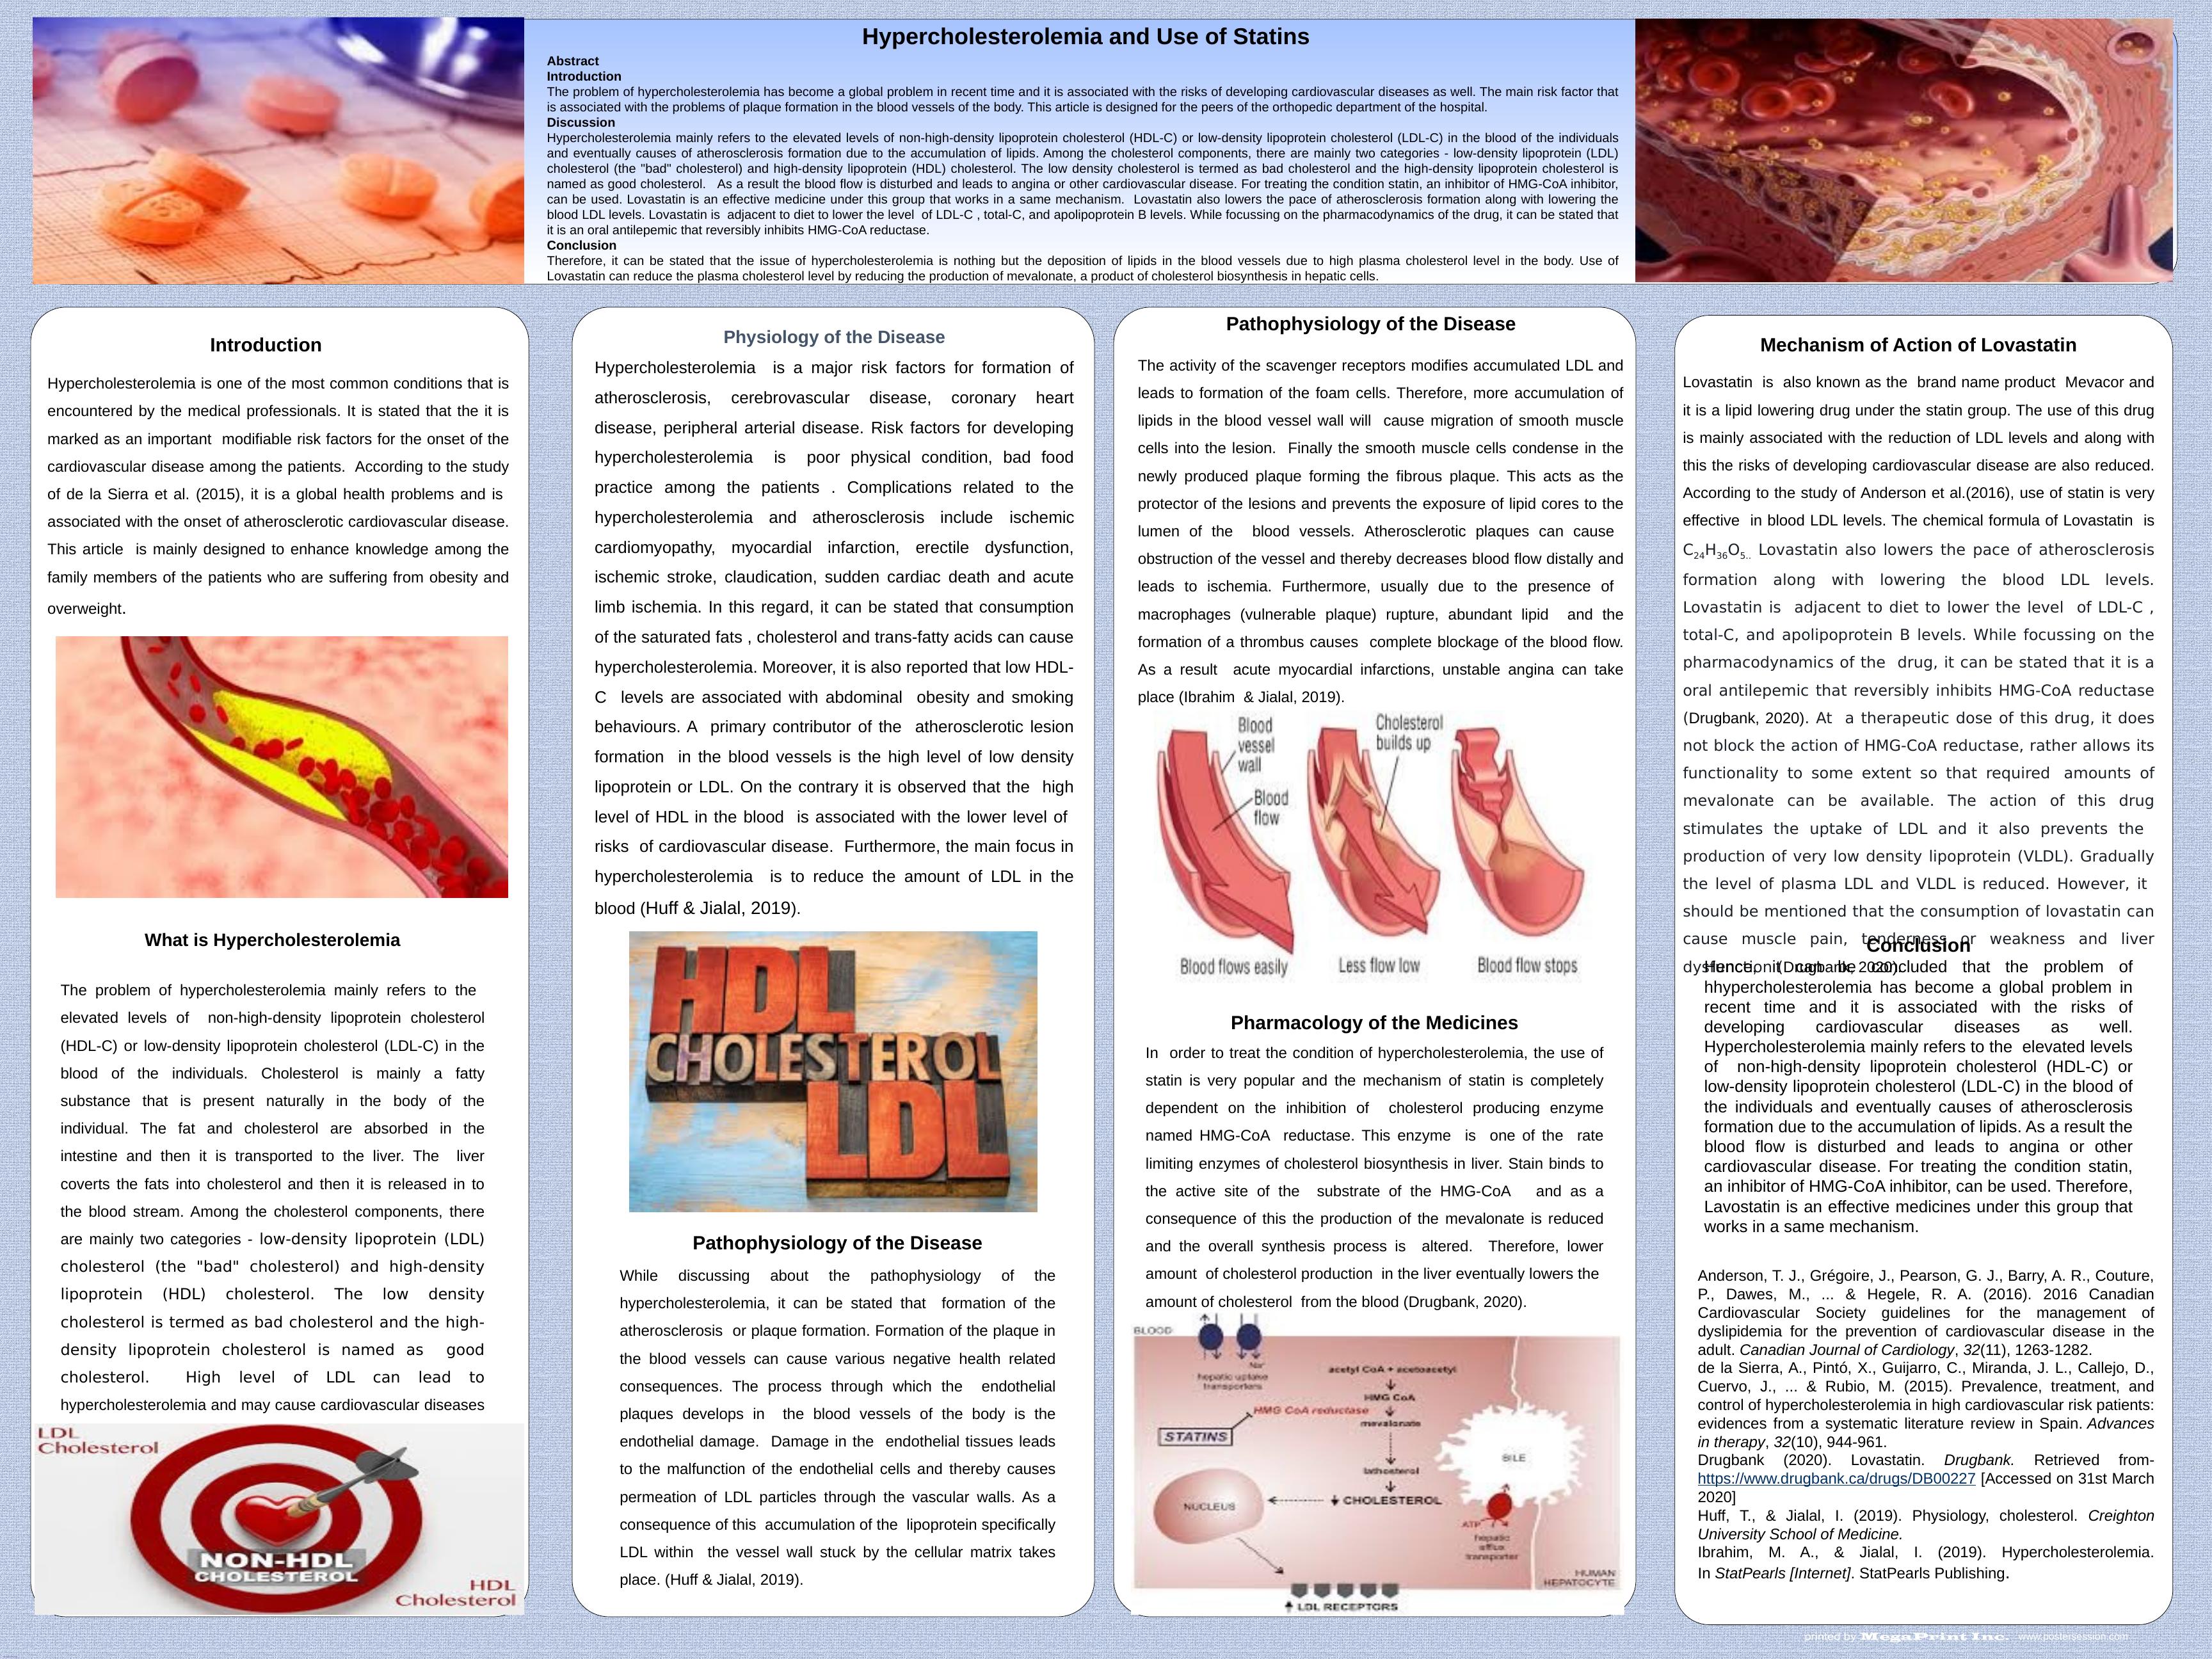 Hypercholesterolemia and Use of Statins_1